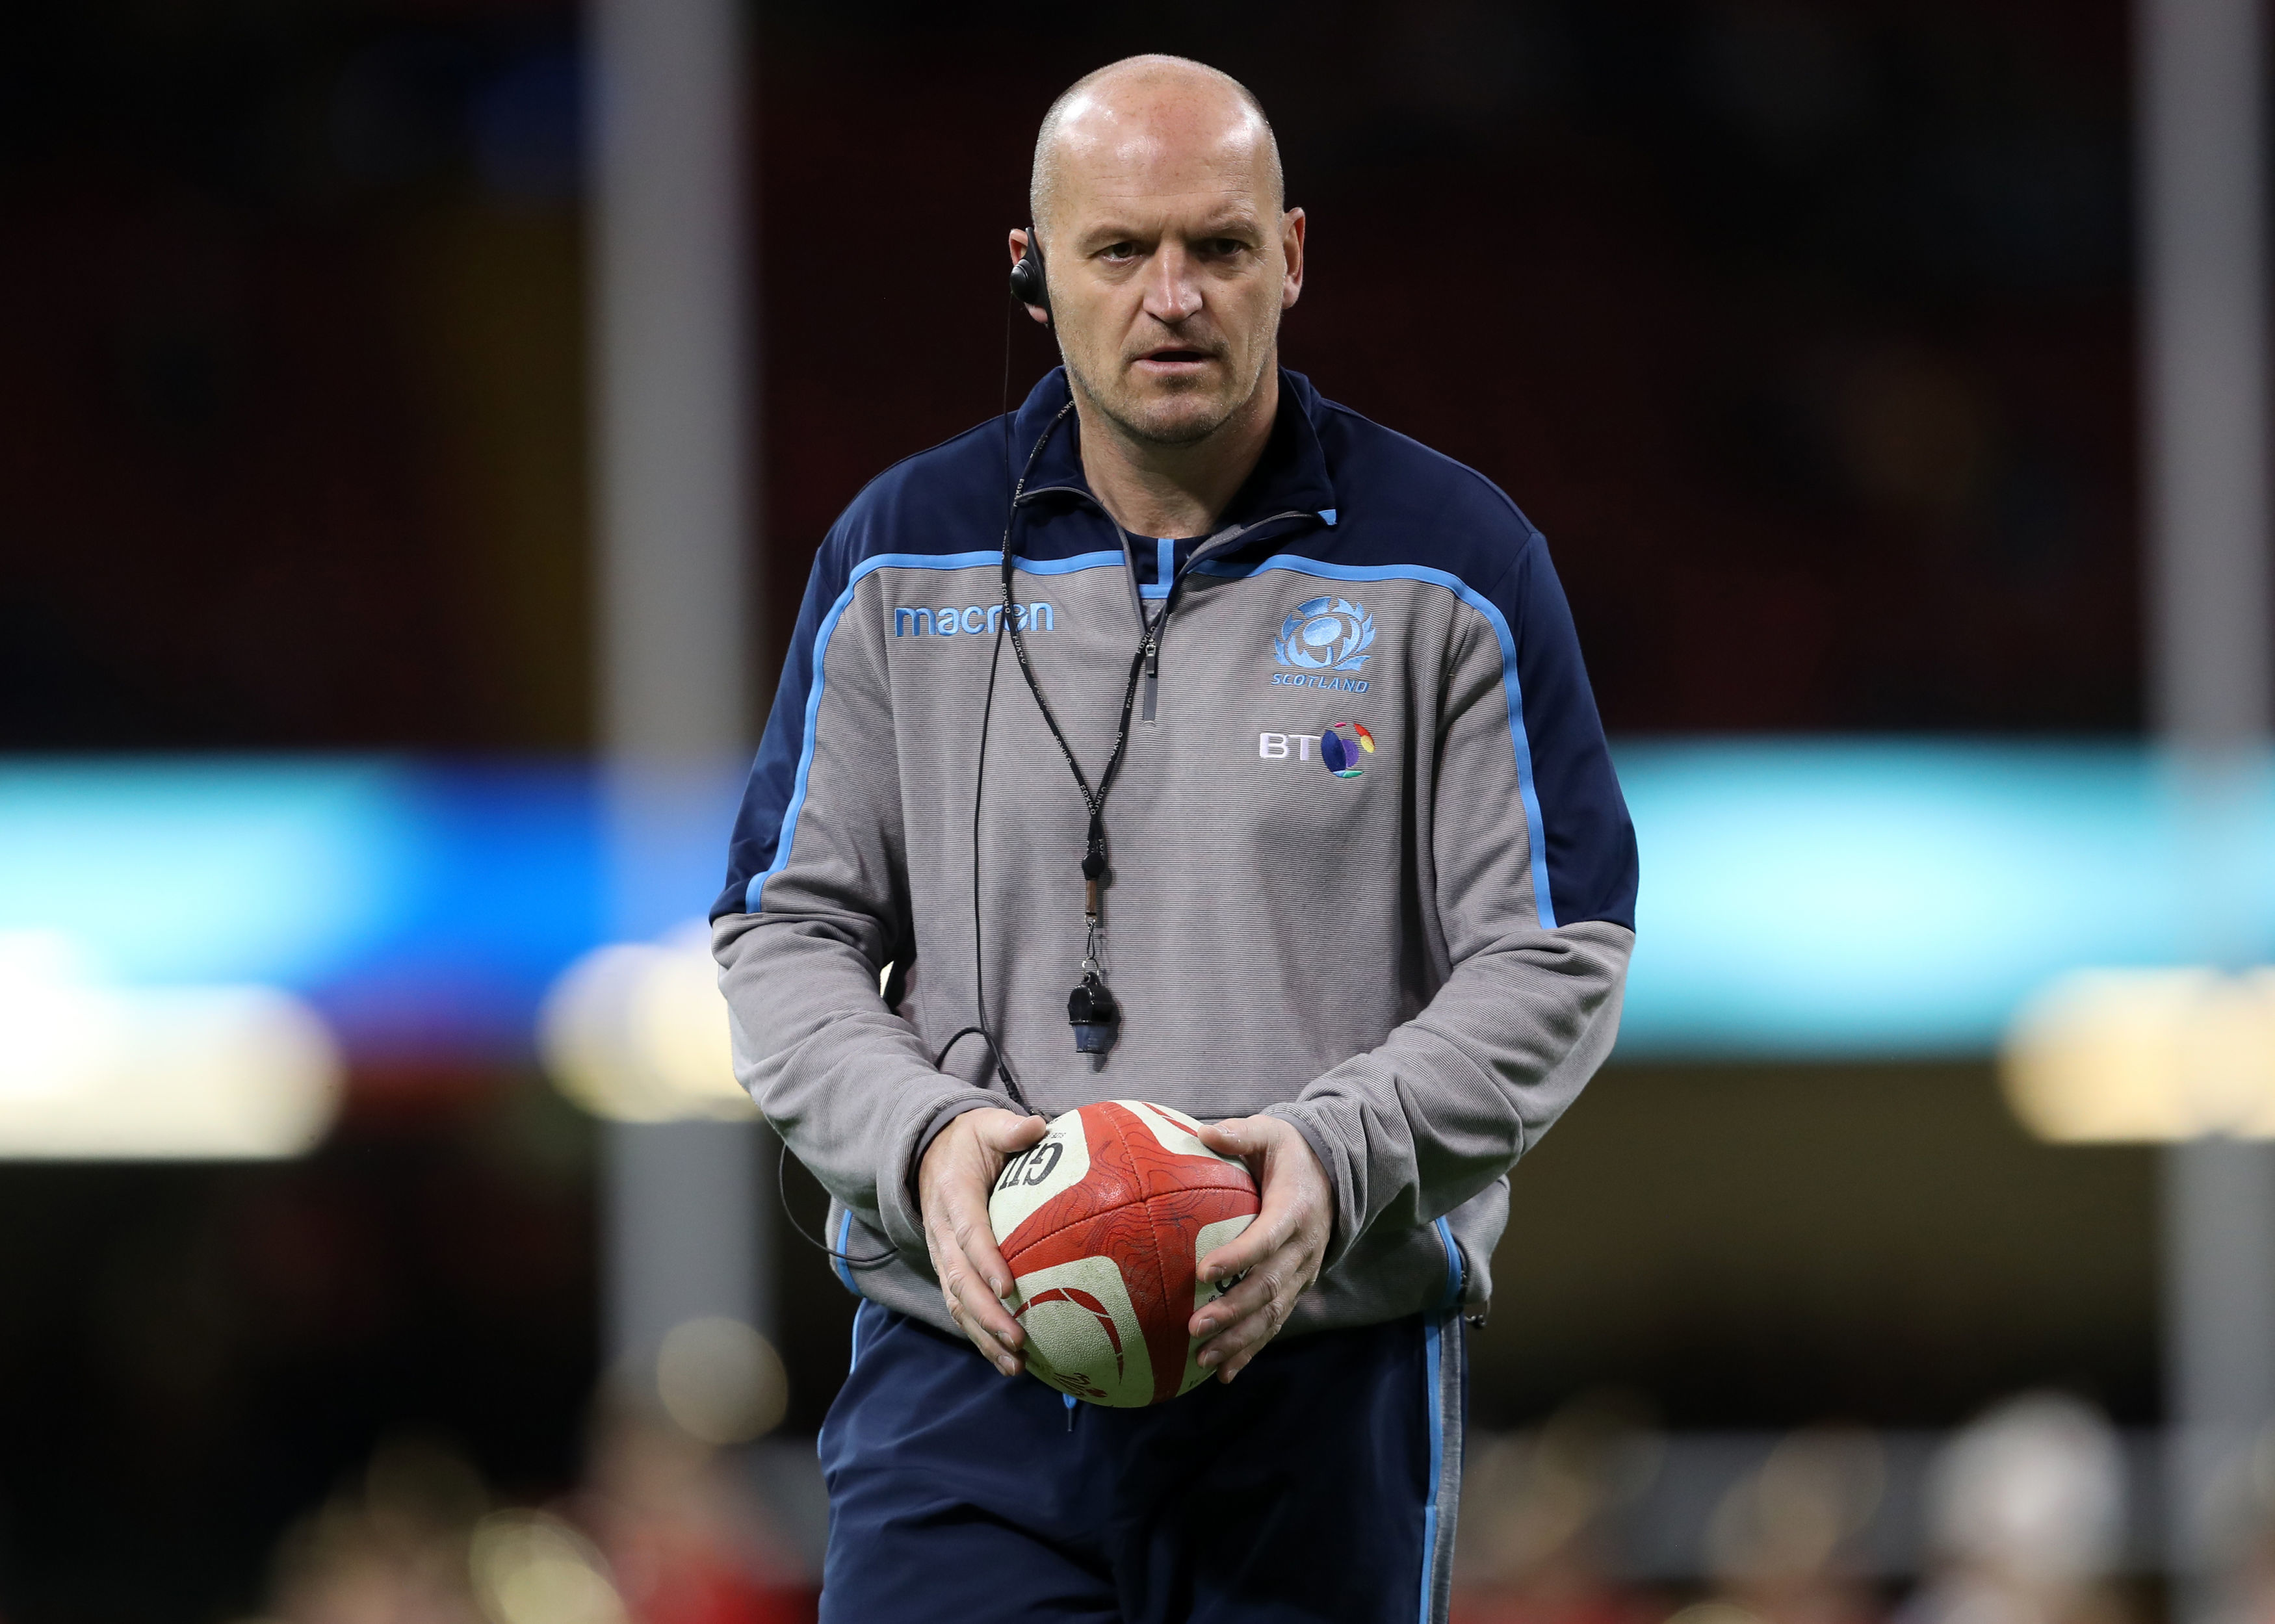 Scotland coach Gregor Townsend believes next opponents Fiji are on the verge of a breakthrough.